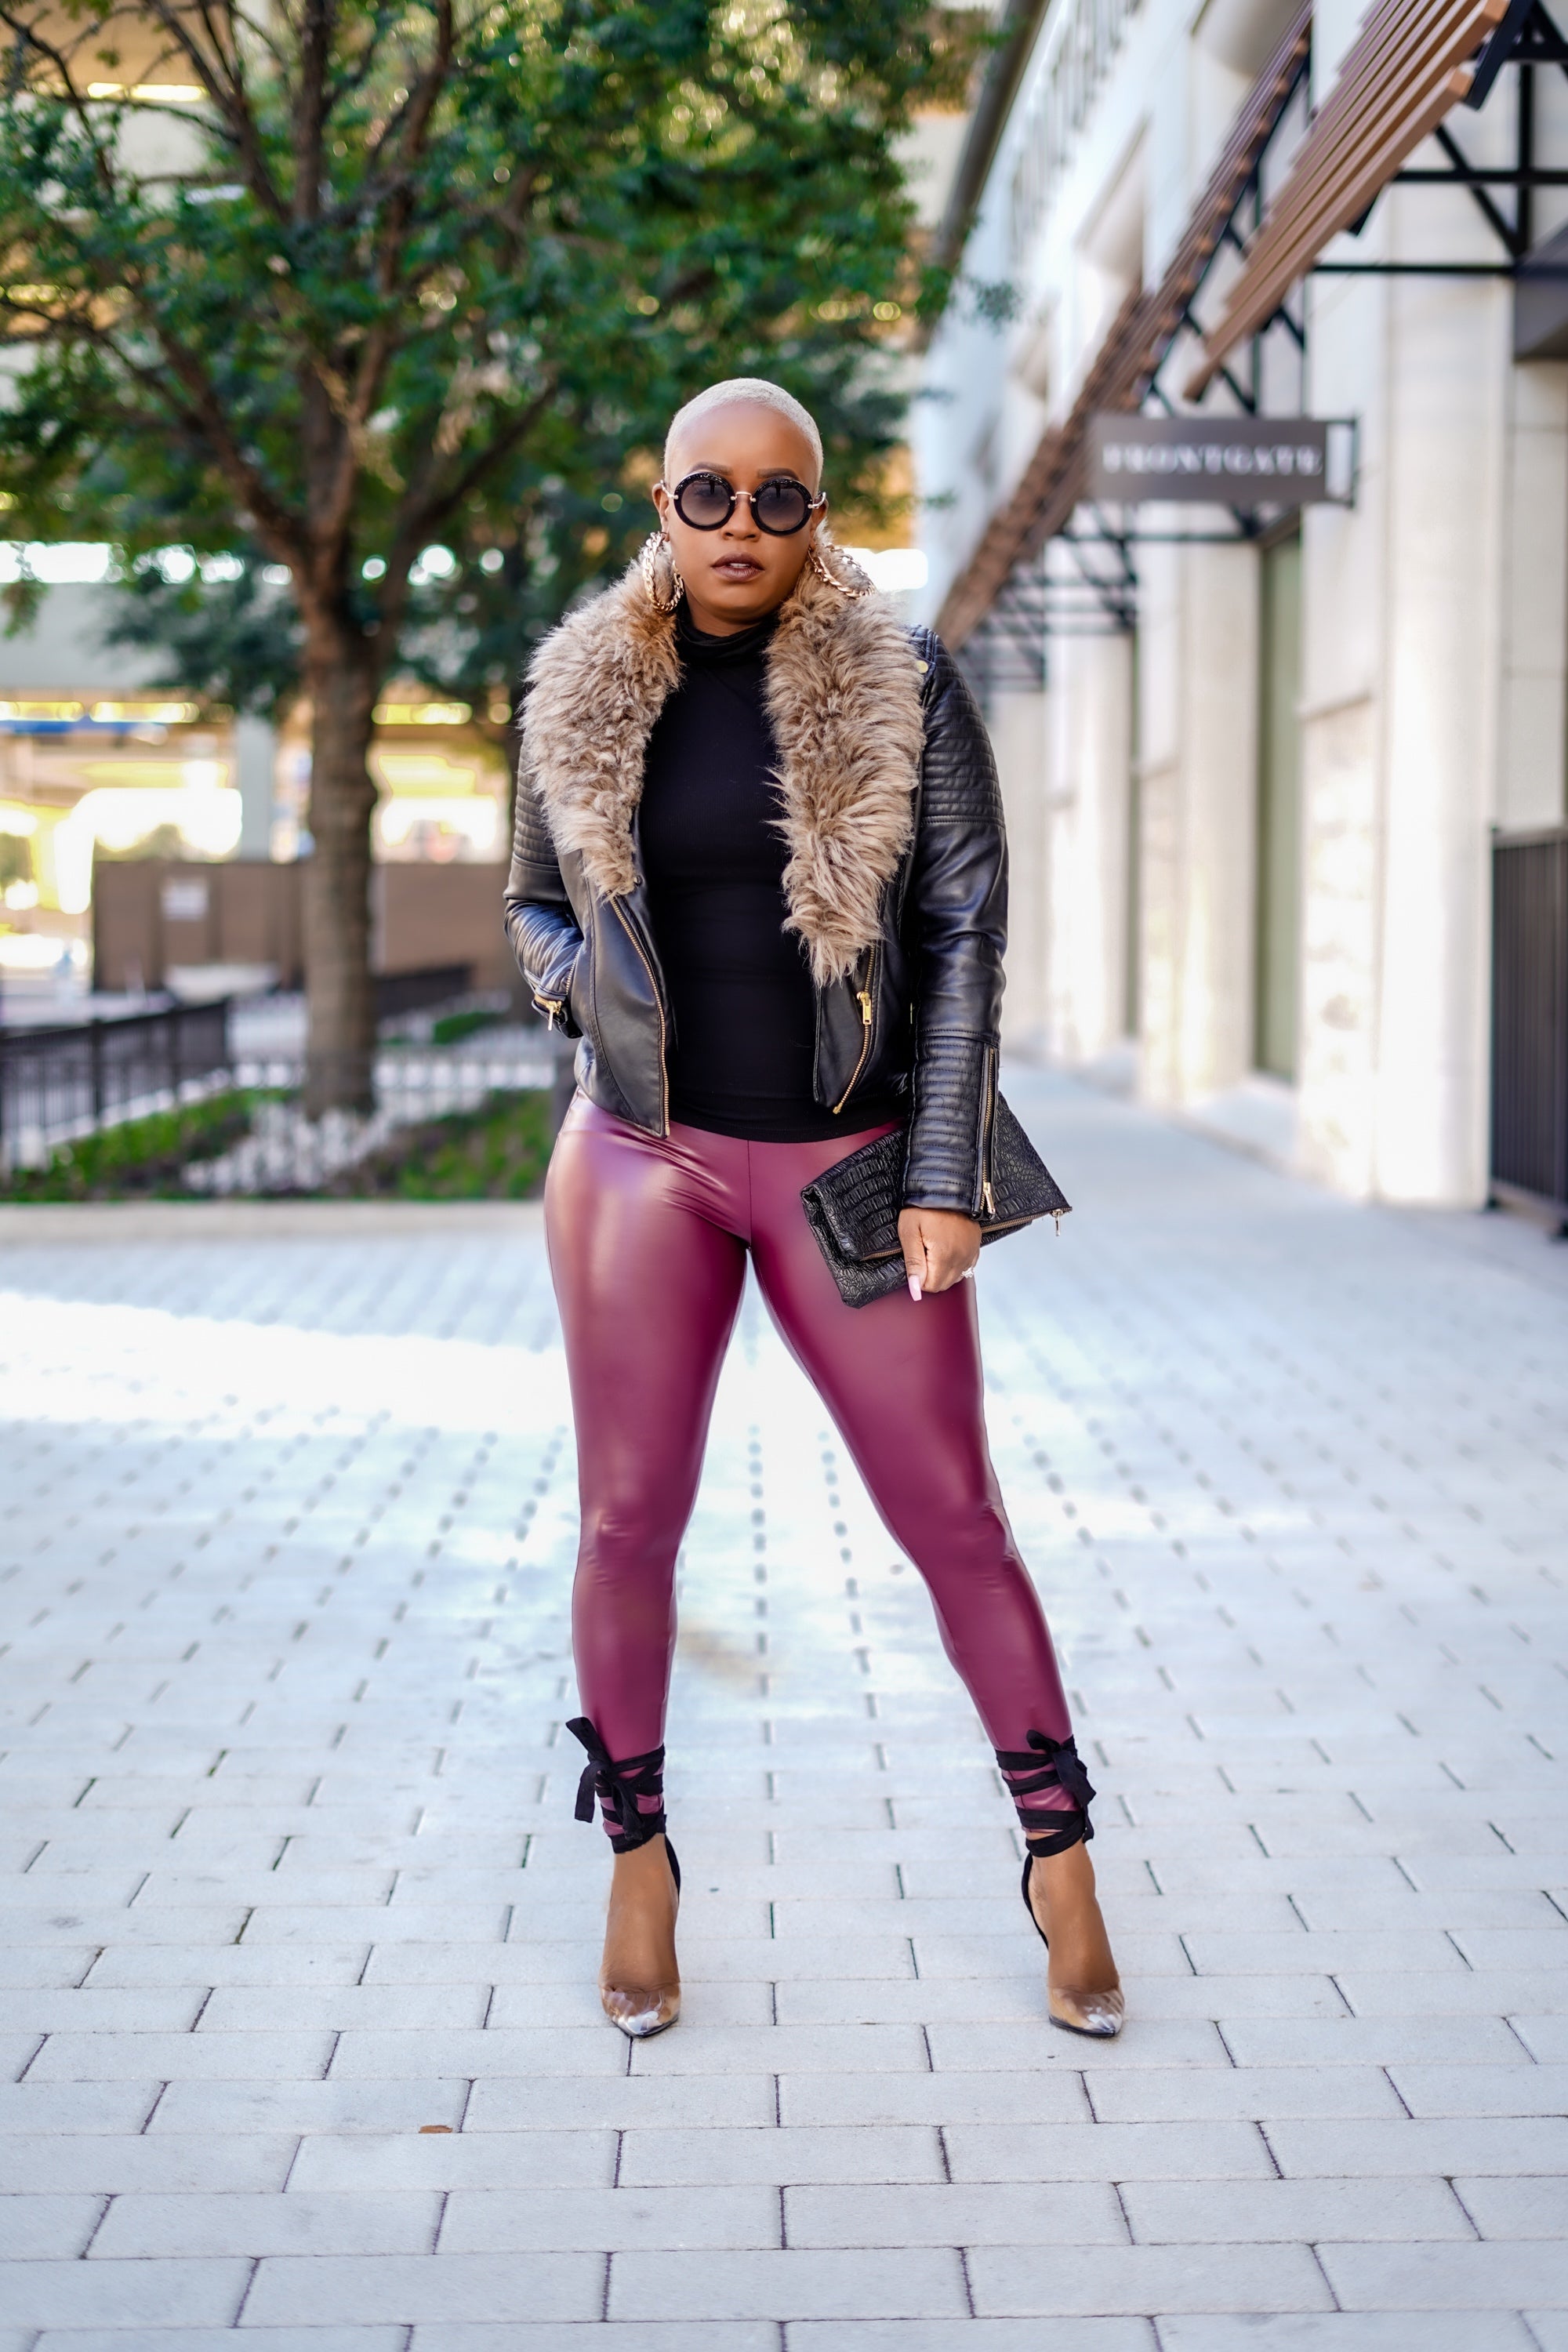 Leather Look Leggings, Inc Faux Leather, Black & High Waisted